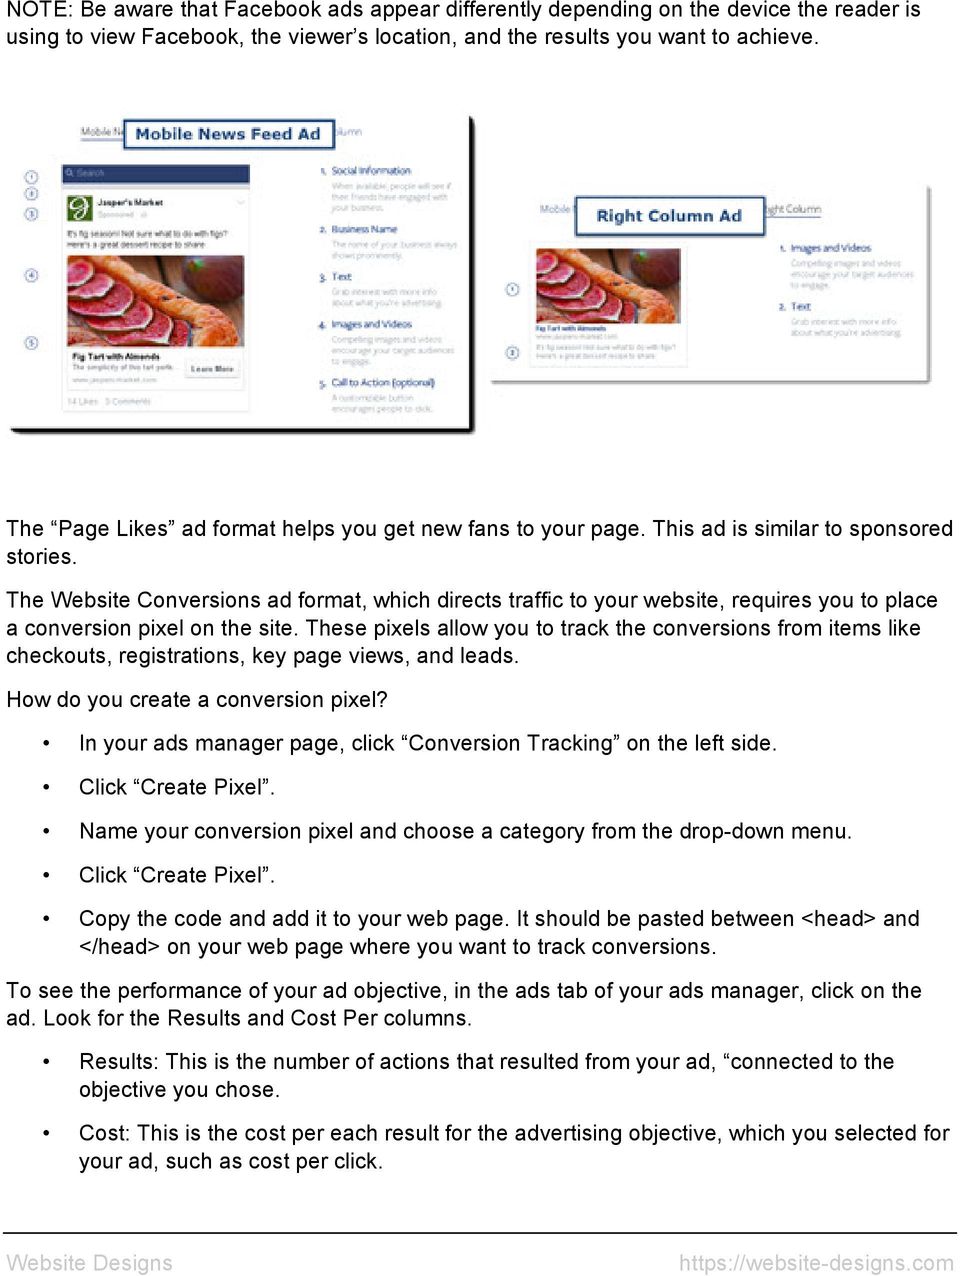 The Website Conversions ad format, which directs traffic to your website, requires you to place a conversion pixel on the site.